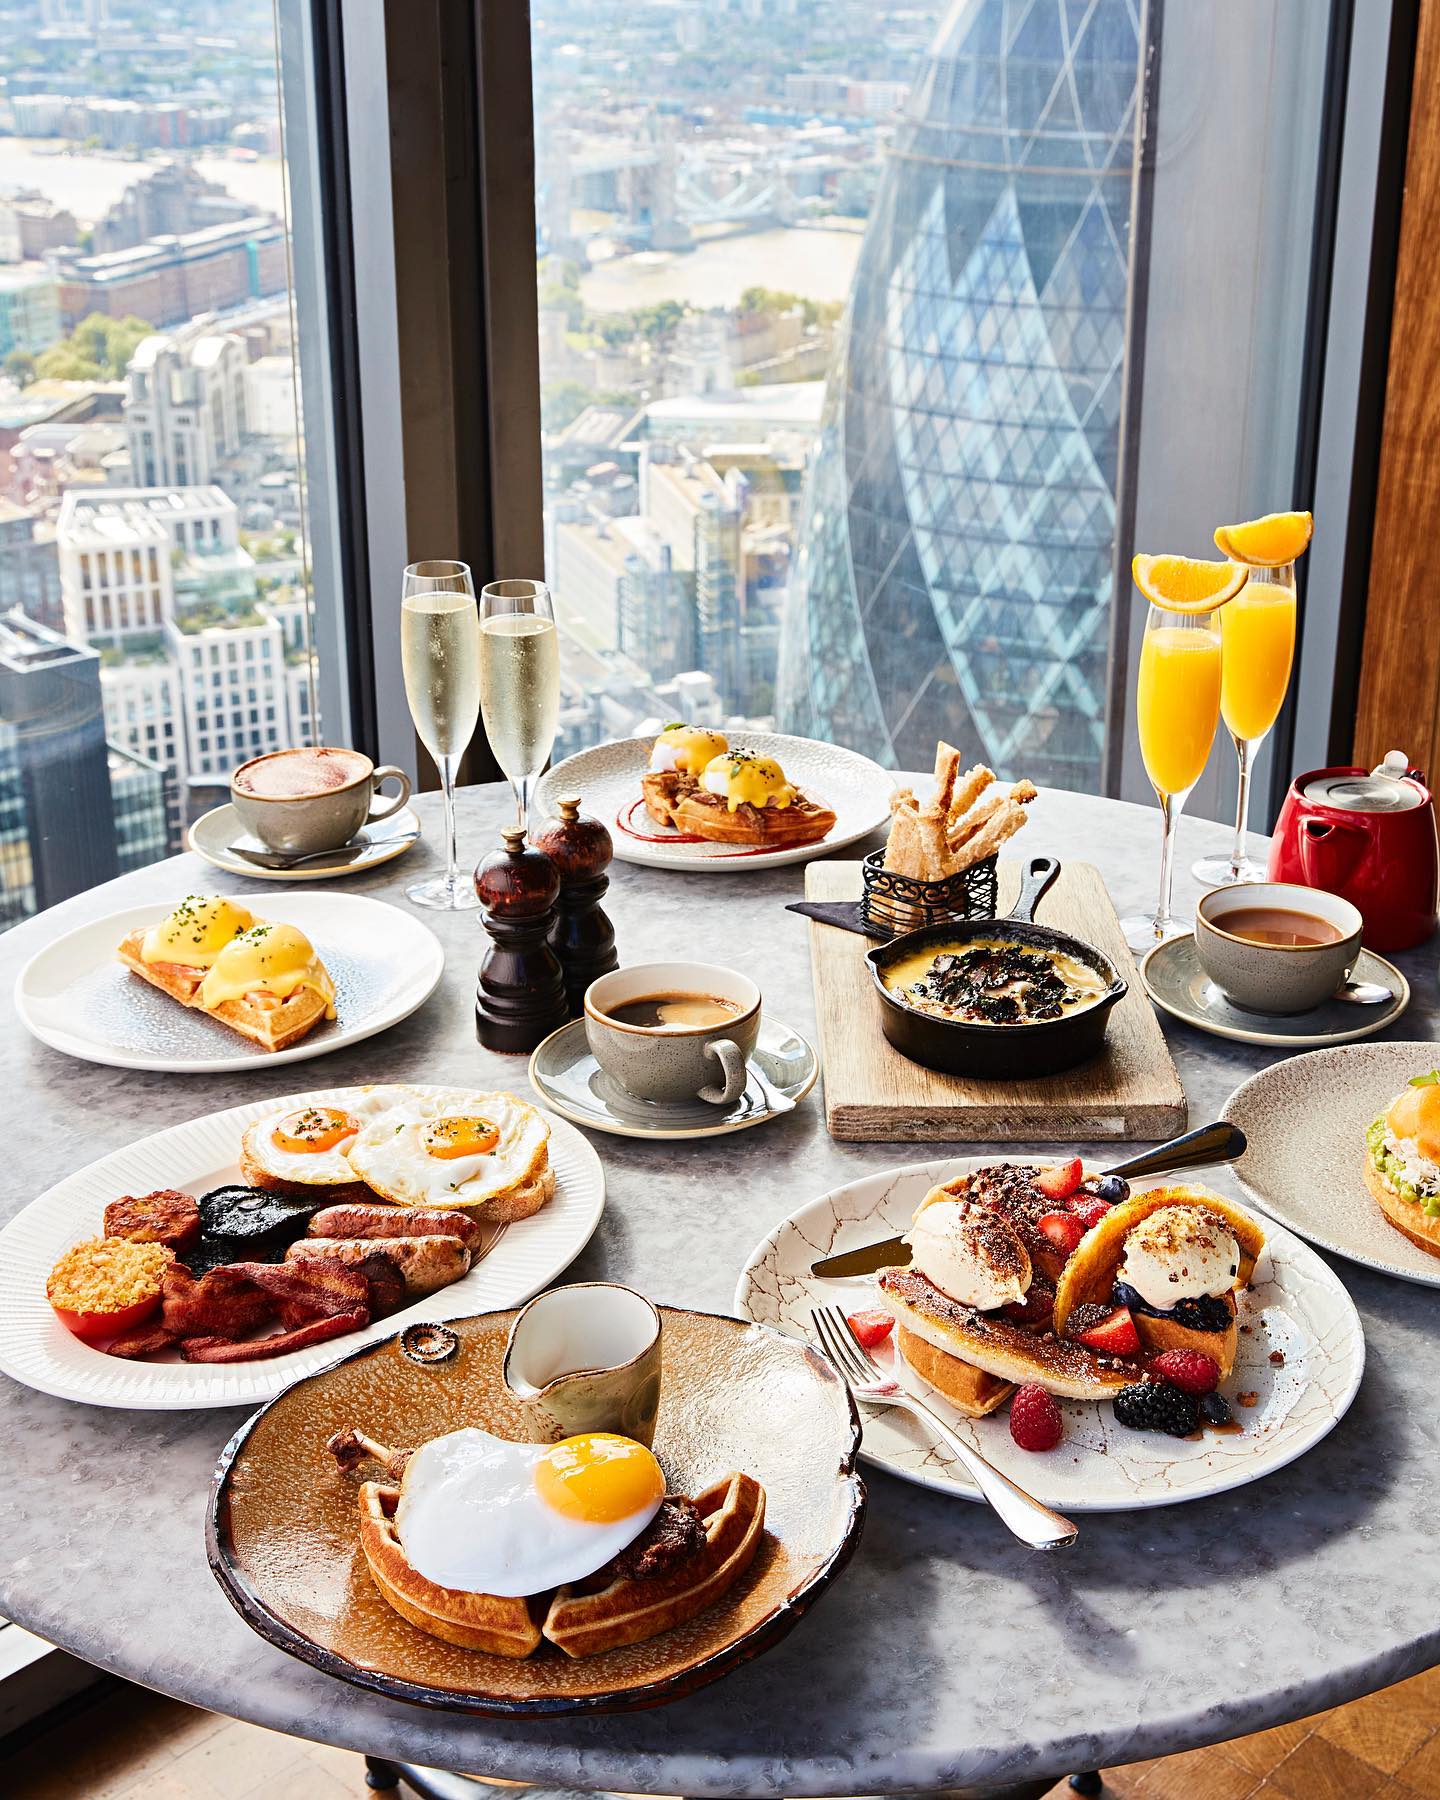 The unique views and delicious food at Duck & Waffle - Warm and Cozy Restaurants in London